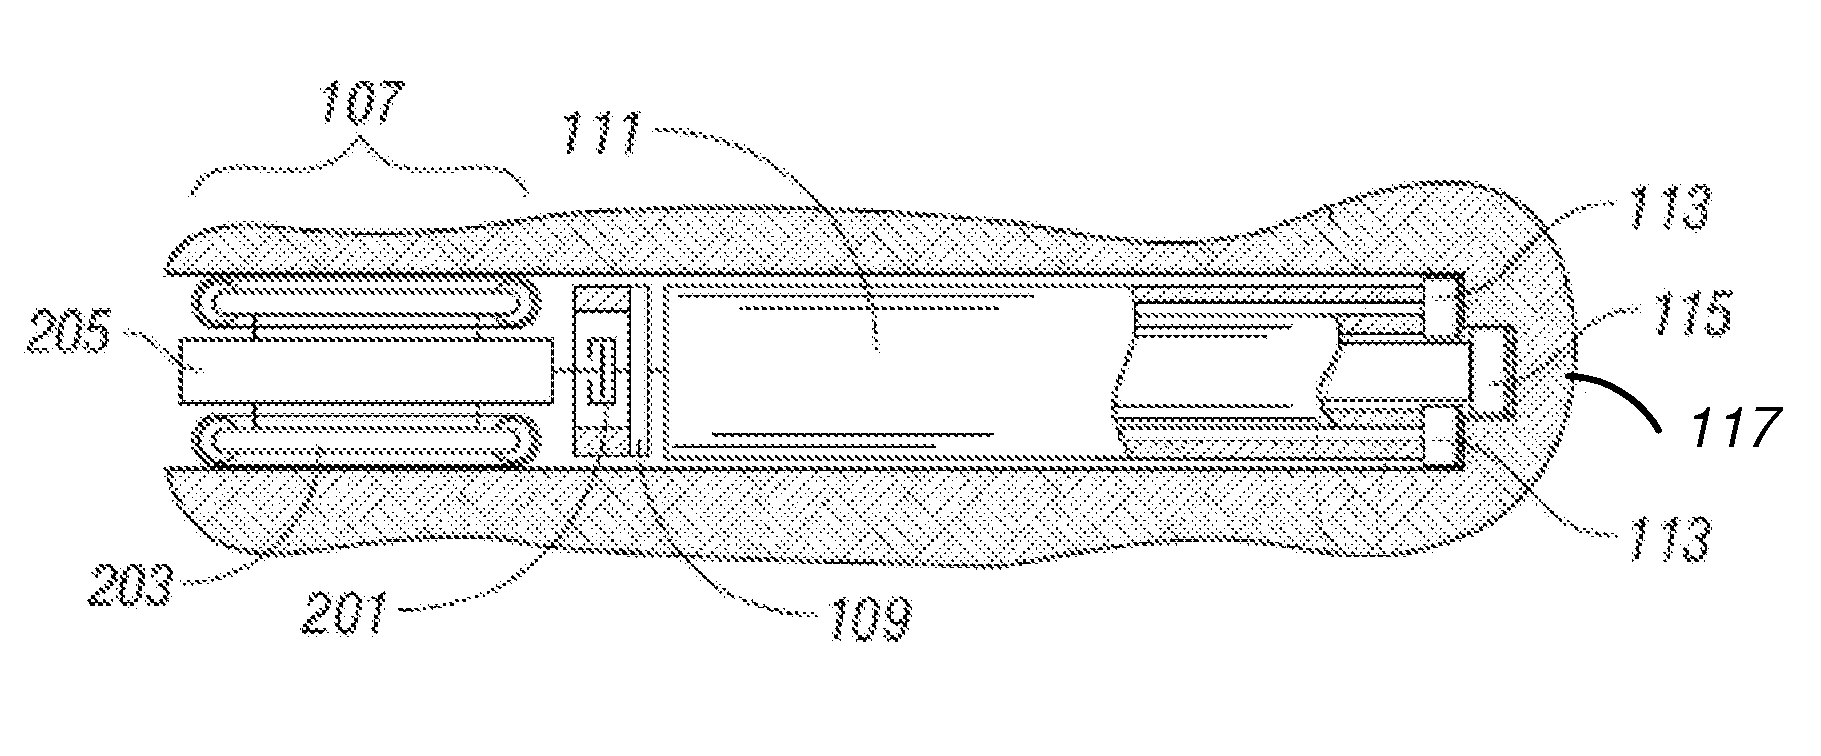 Apparatus for eliminating net drill bit torque and controlling drill bit walk